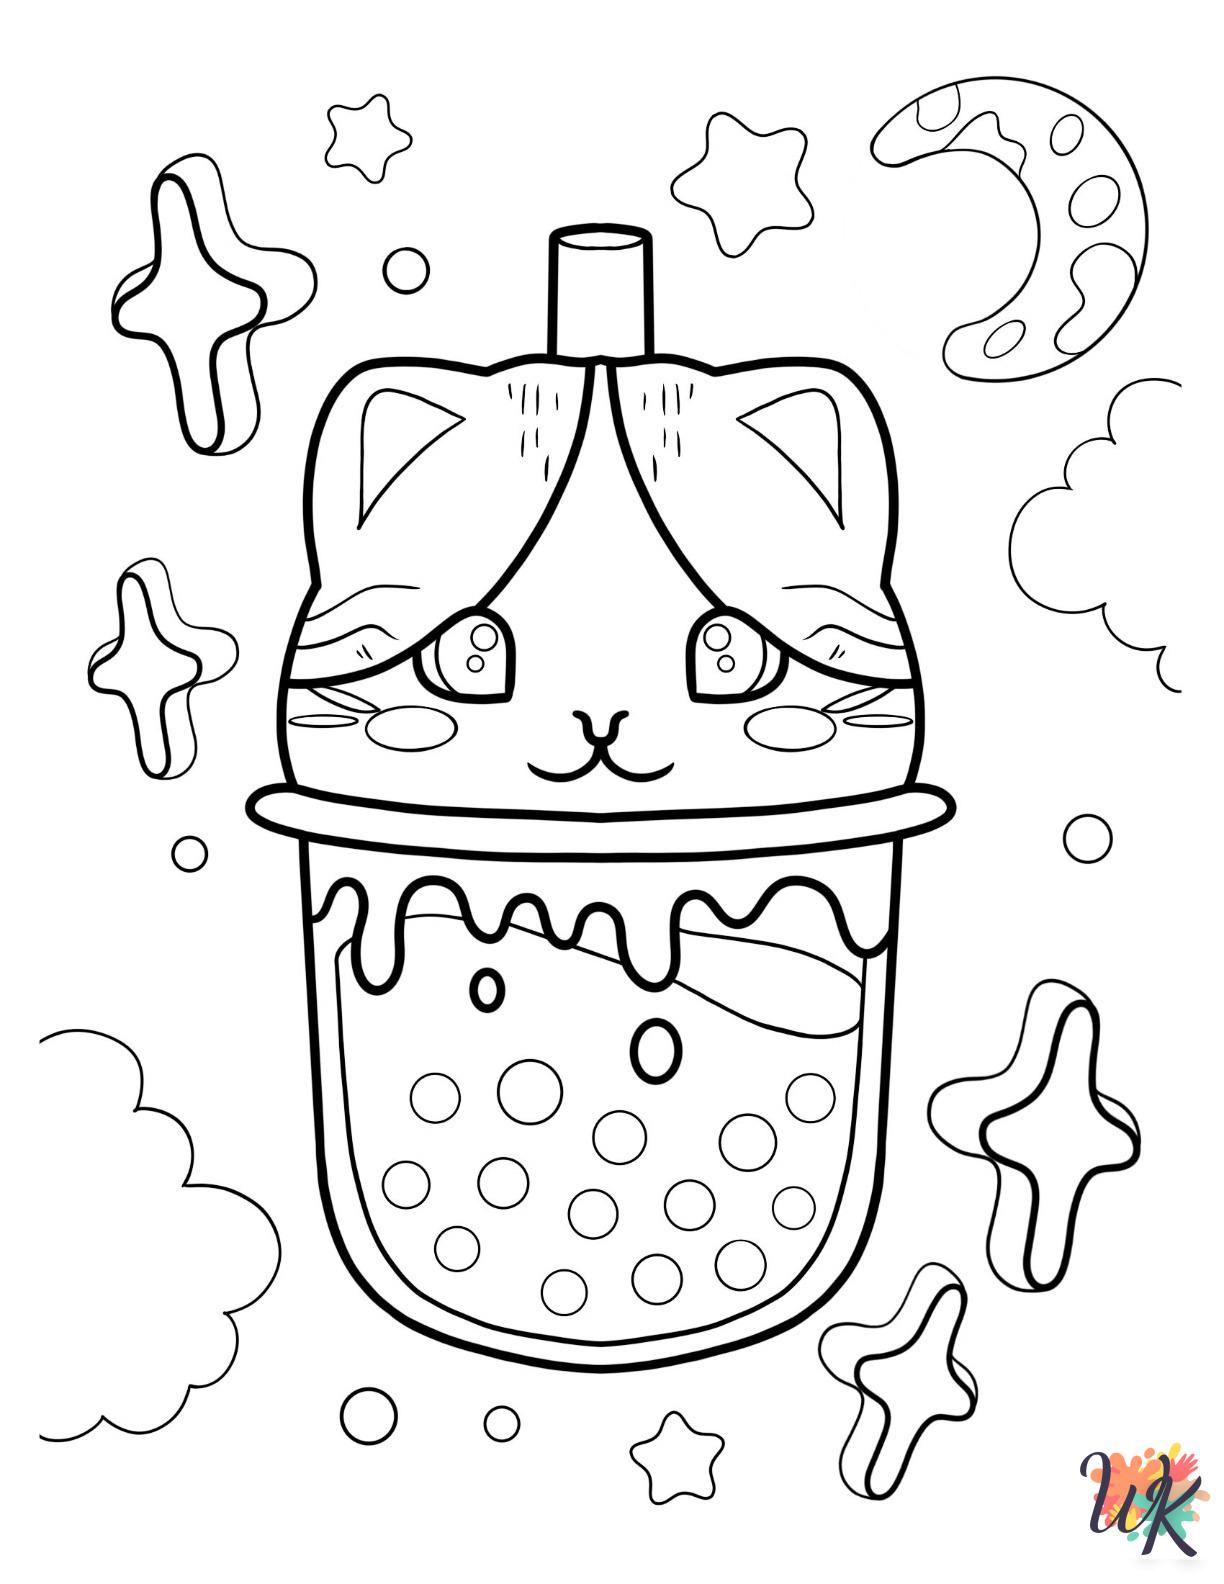 Boba Tea adult coloring pages